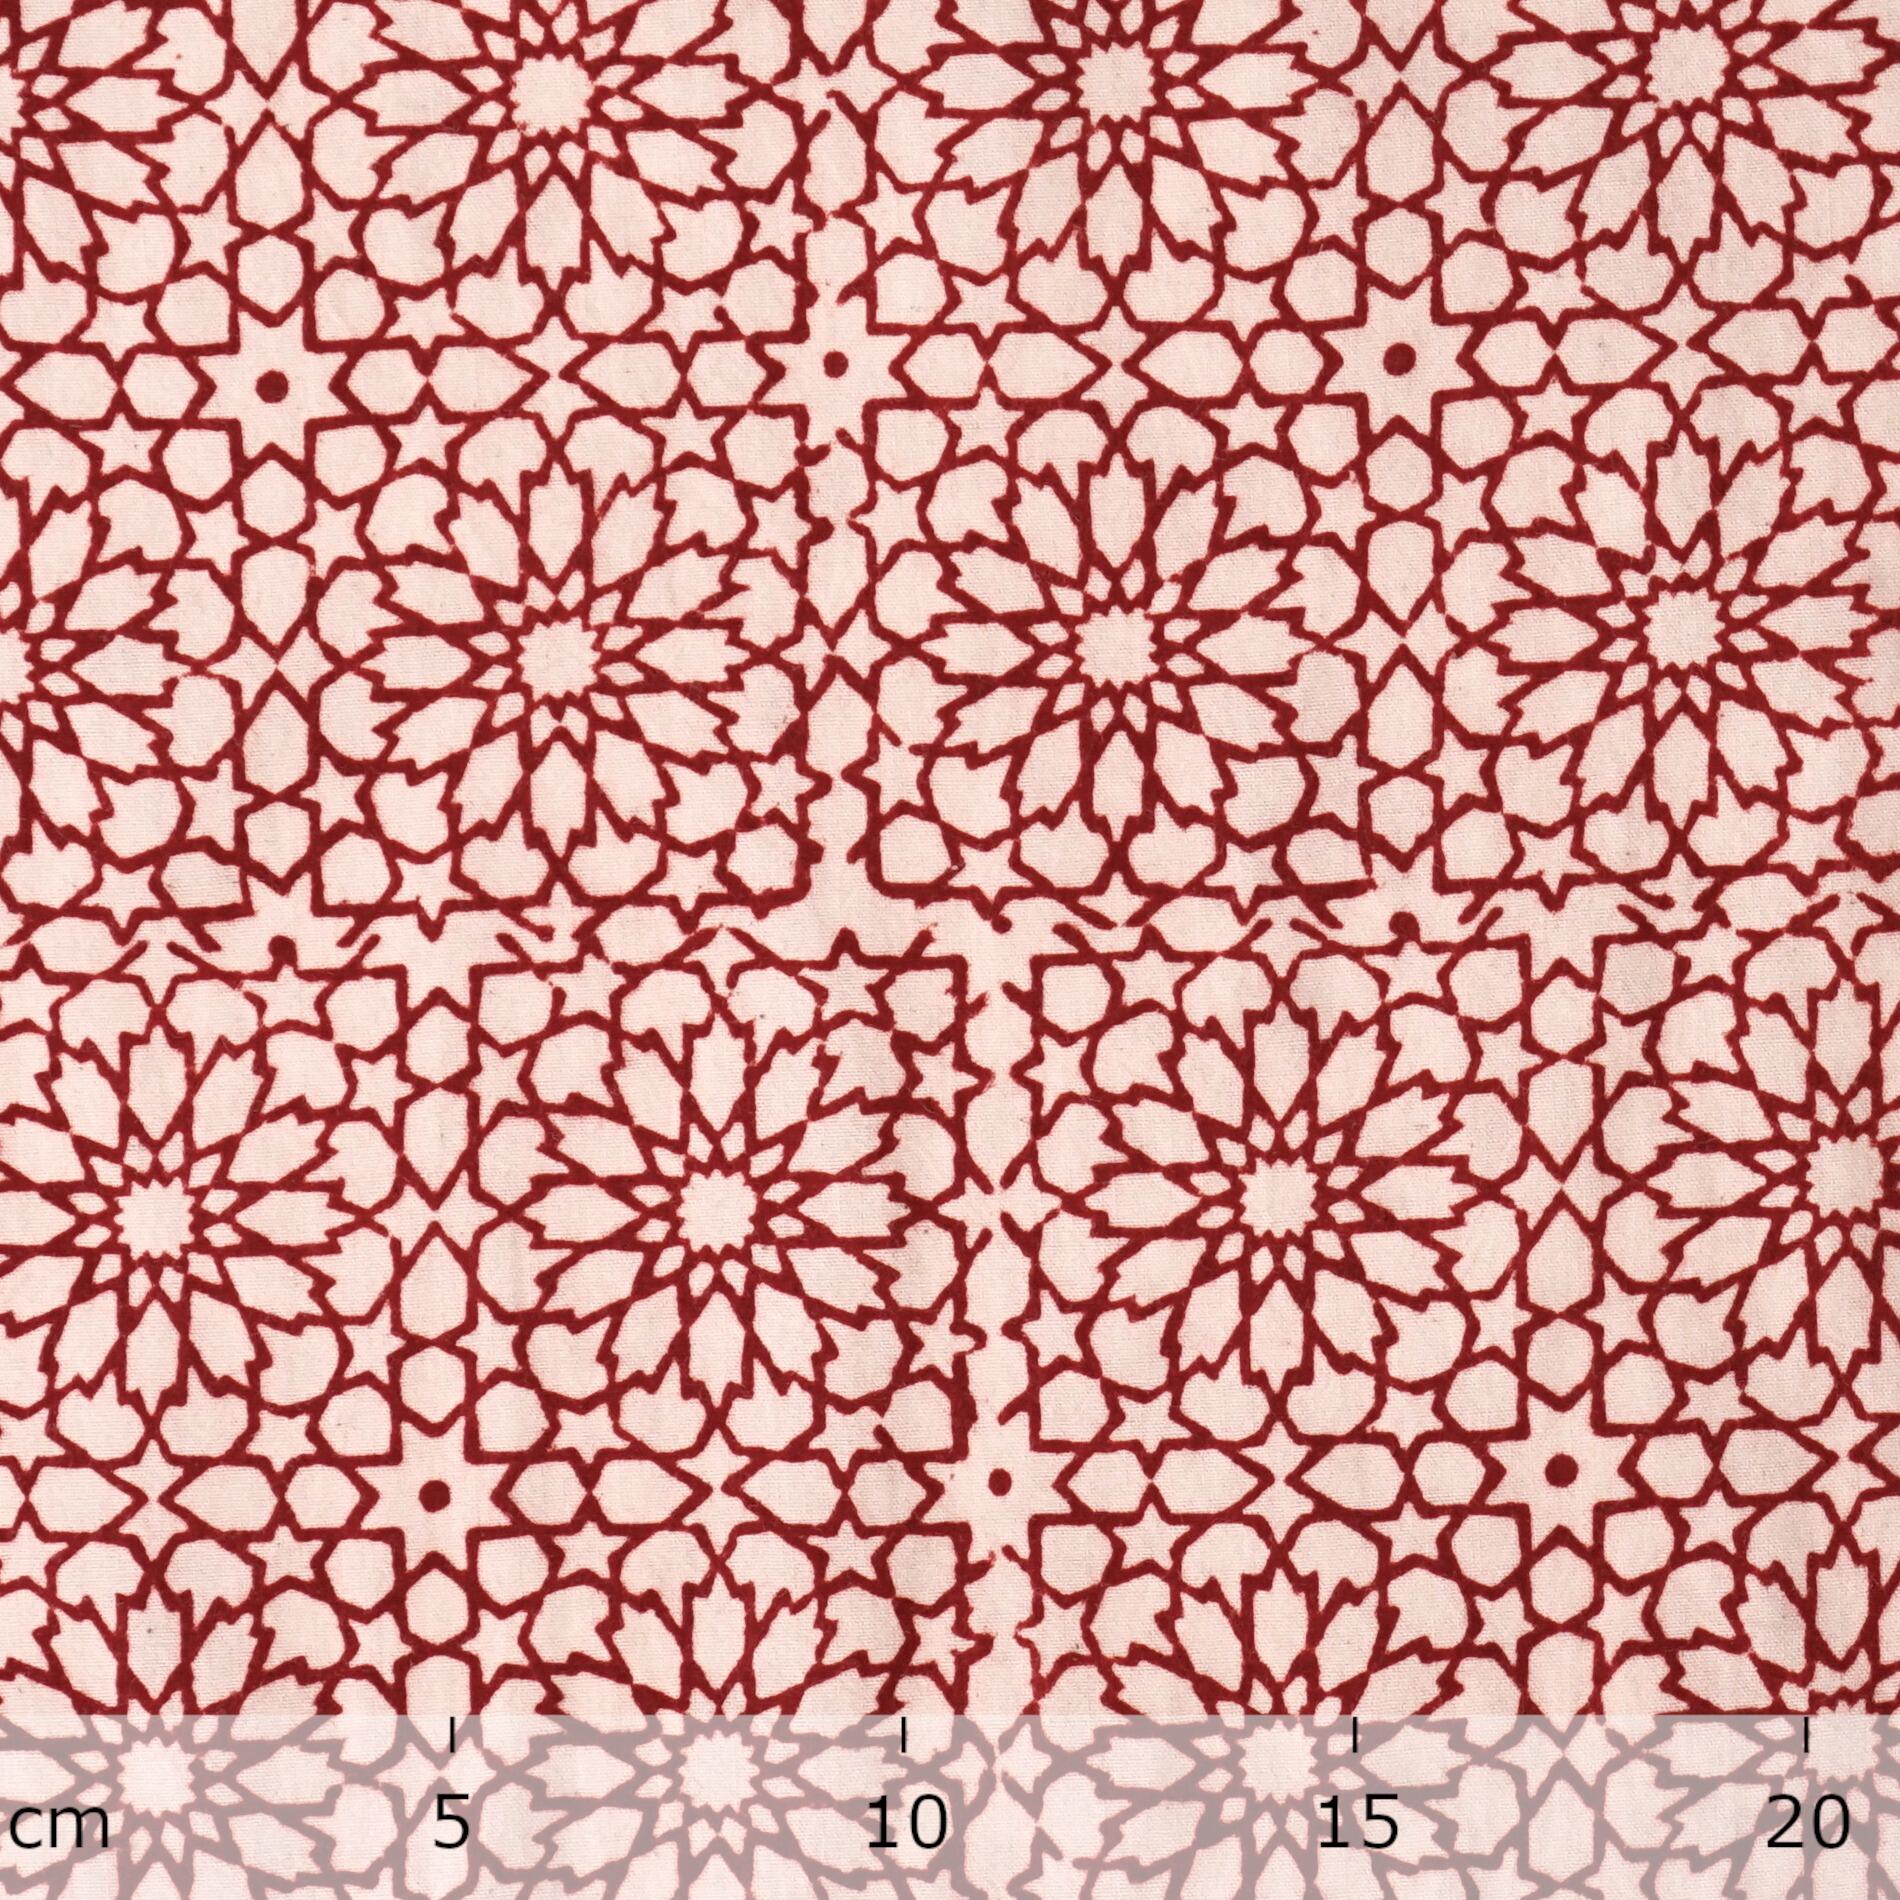 100% Block-Printed Cotton Fabric From India - Floral Sublimity Design - Alizarin Red Dye - Ruler